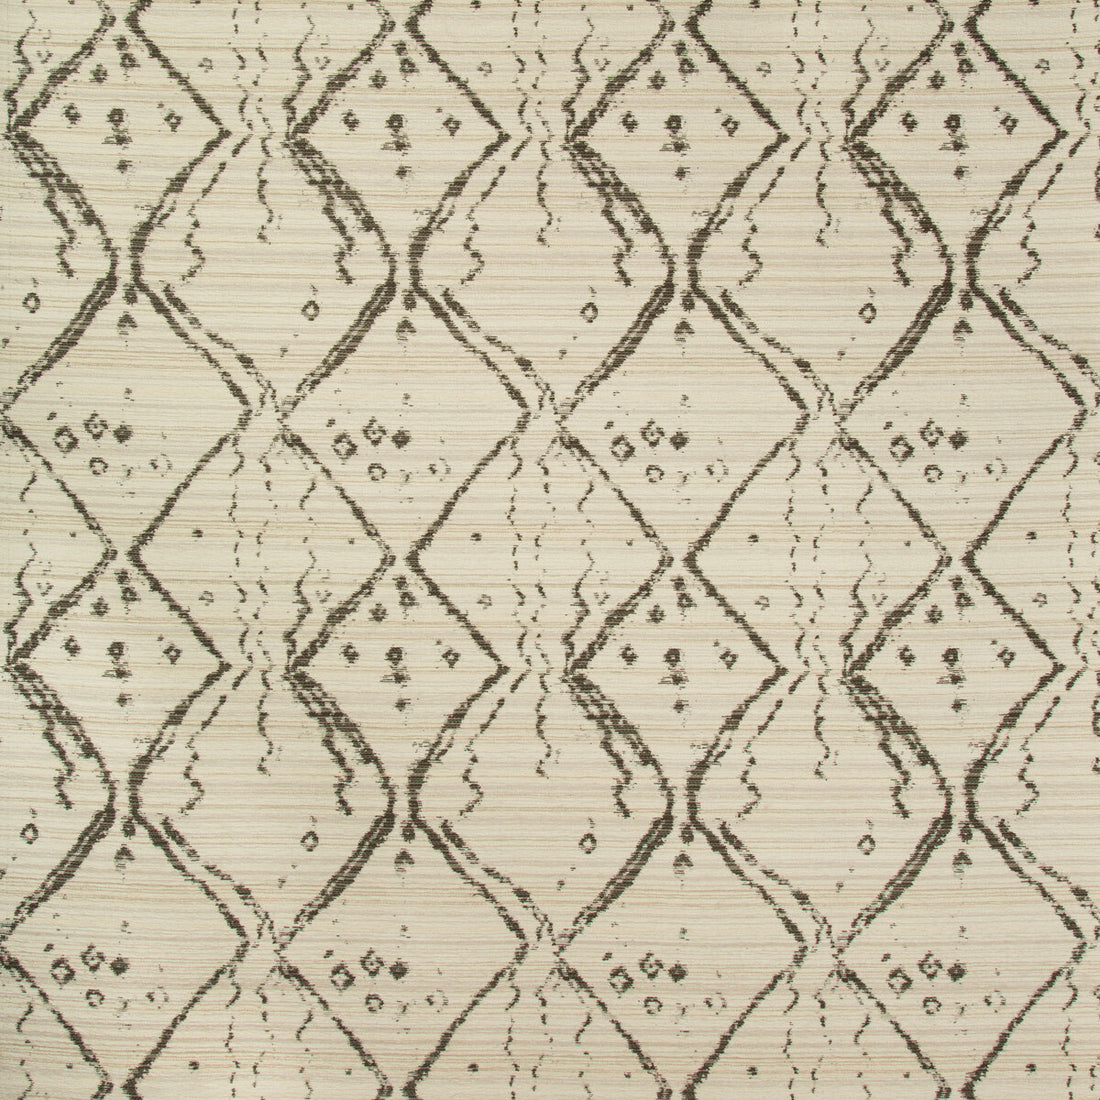 Globe Trot fabric in stone color - pattern 34948.106.0 - by Kravet Design in the Nate Berkus Well-Traveled collection